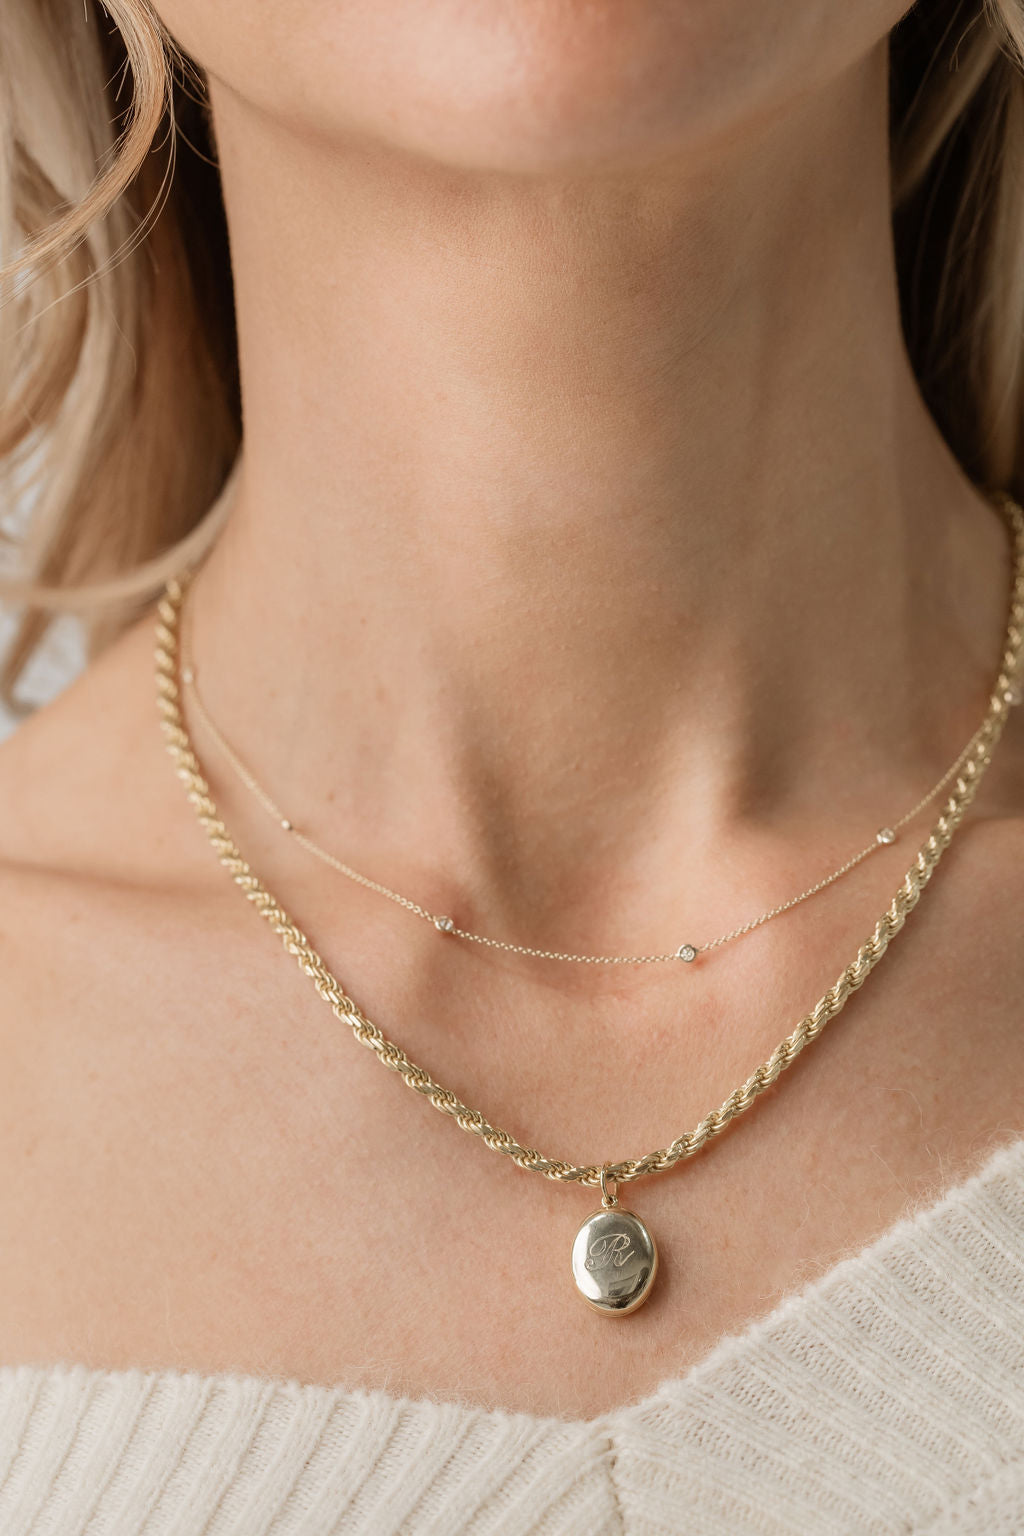 diamond satellite necklace with gold oval locket on rope chain